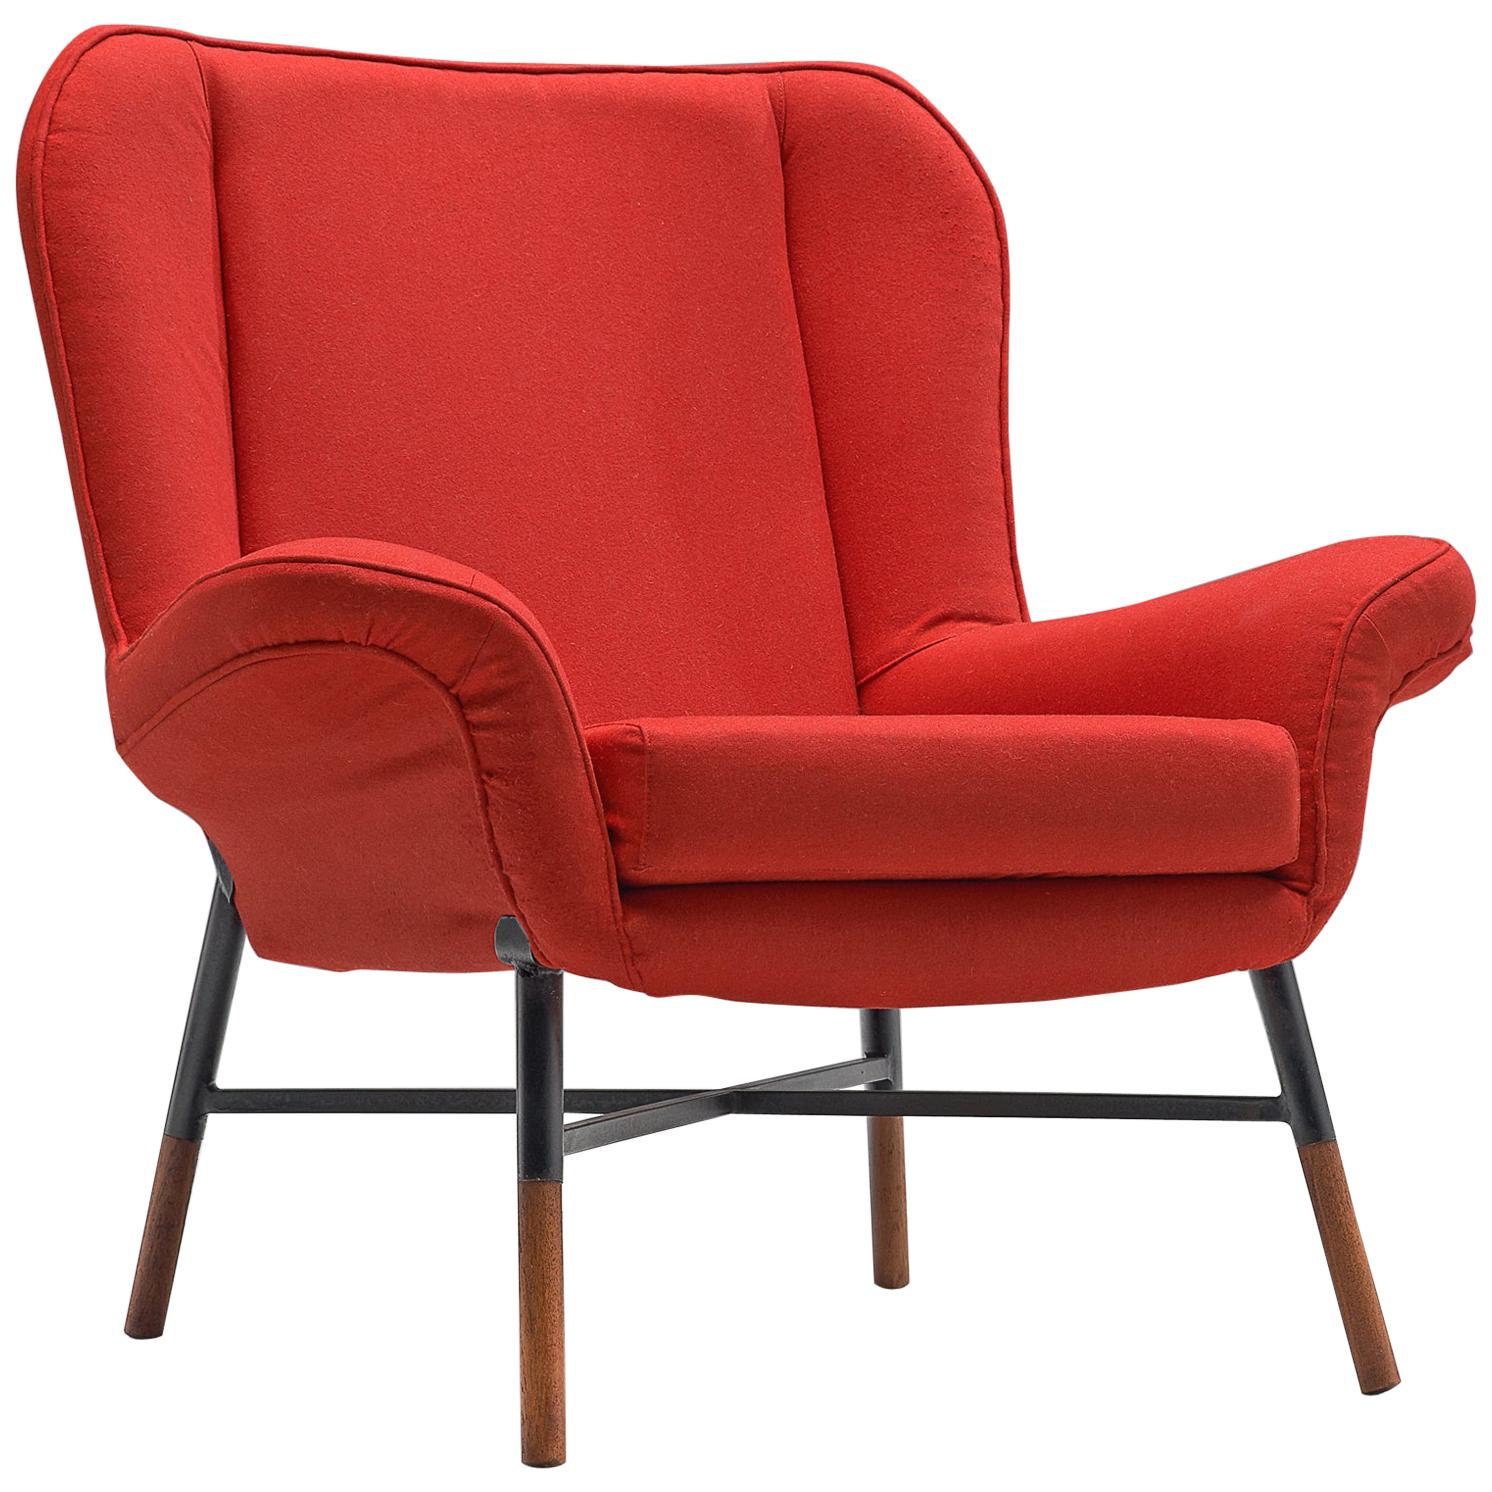 First Edition BBPR 'Giulietta' Lounge Chair in Red Upholstery